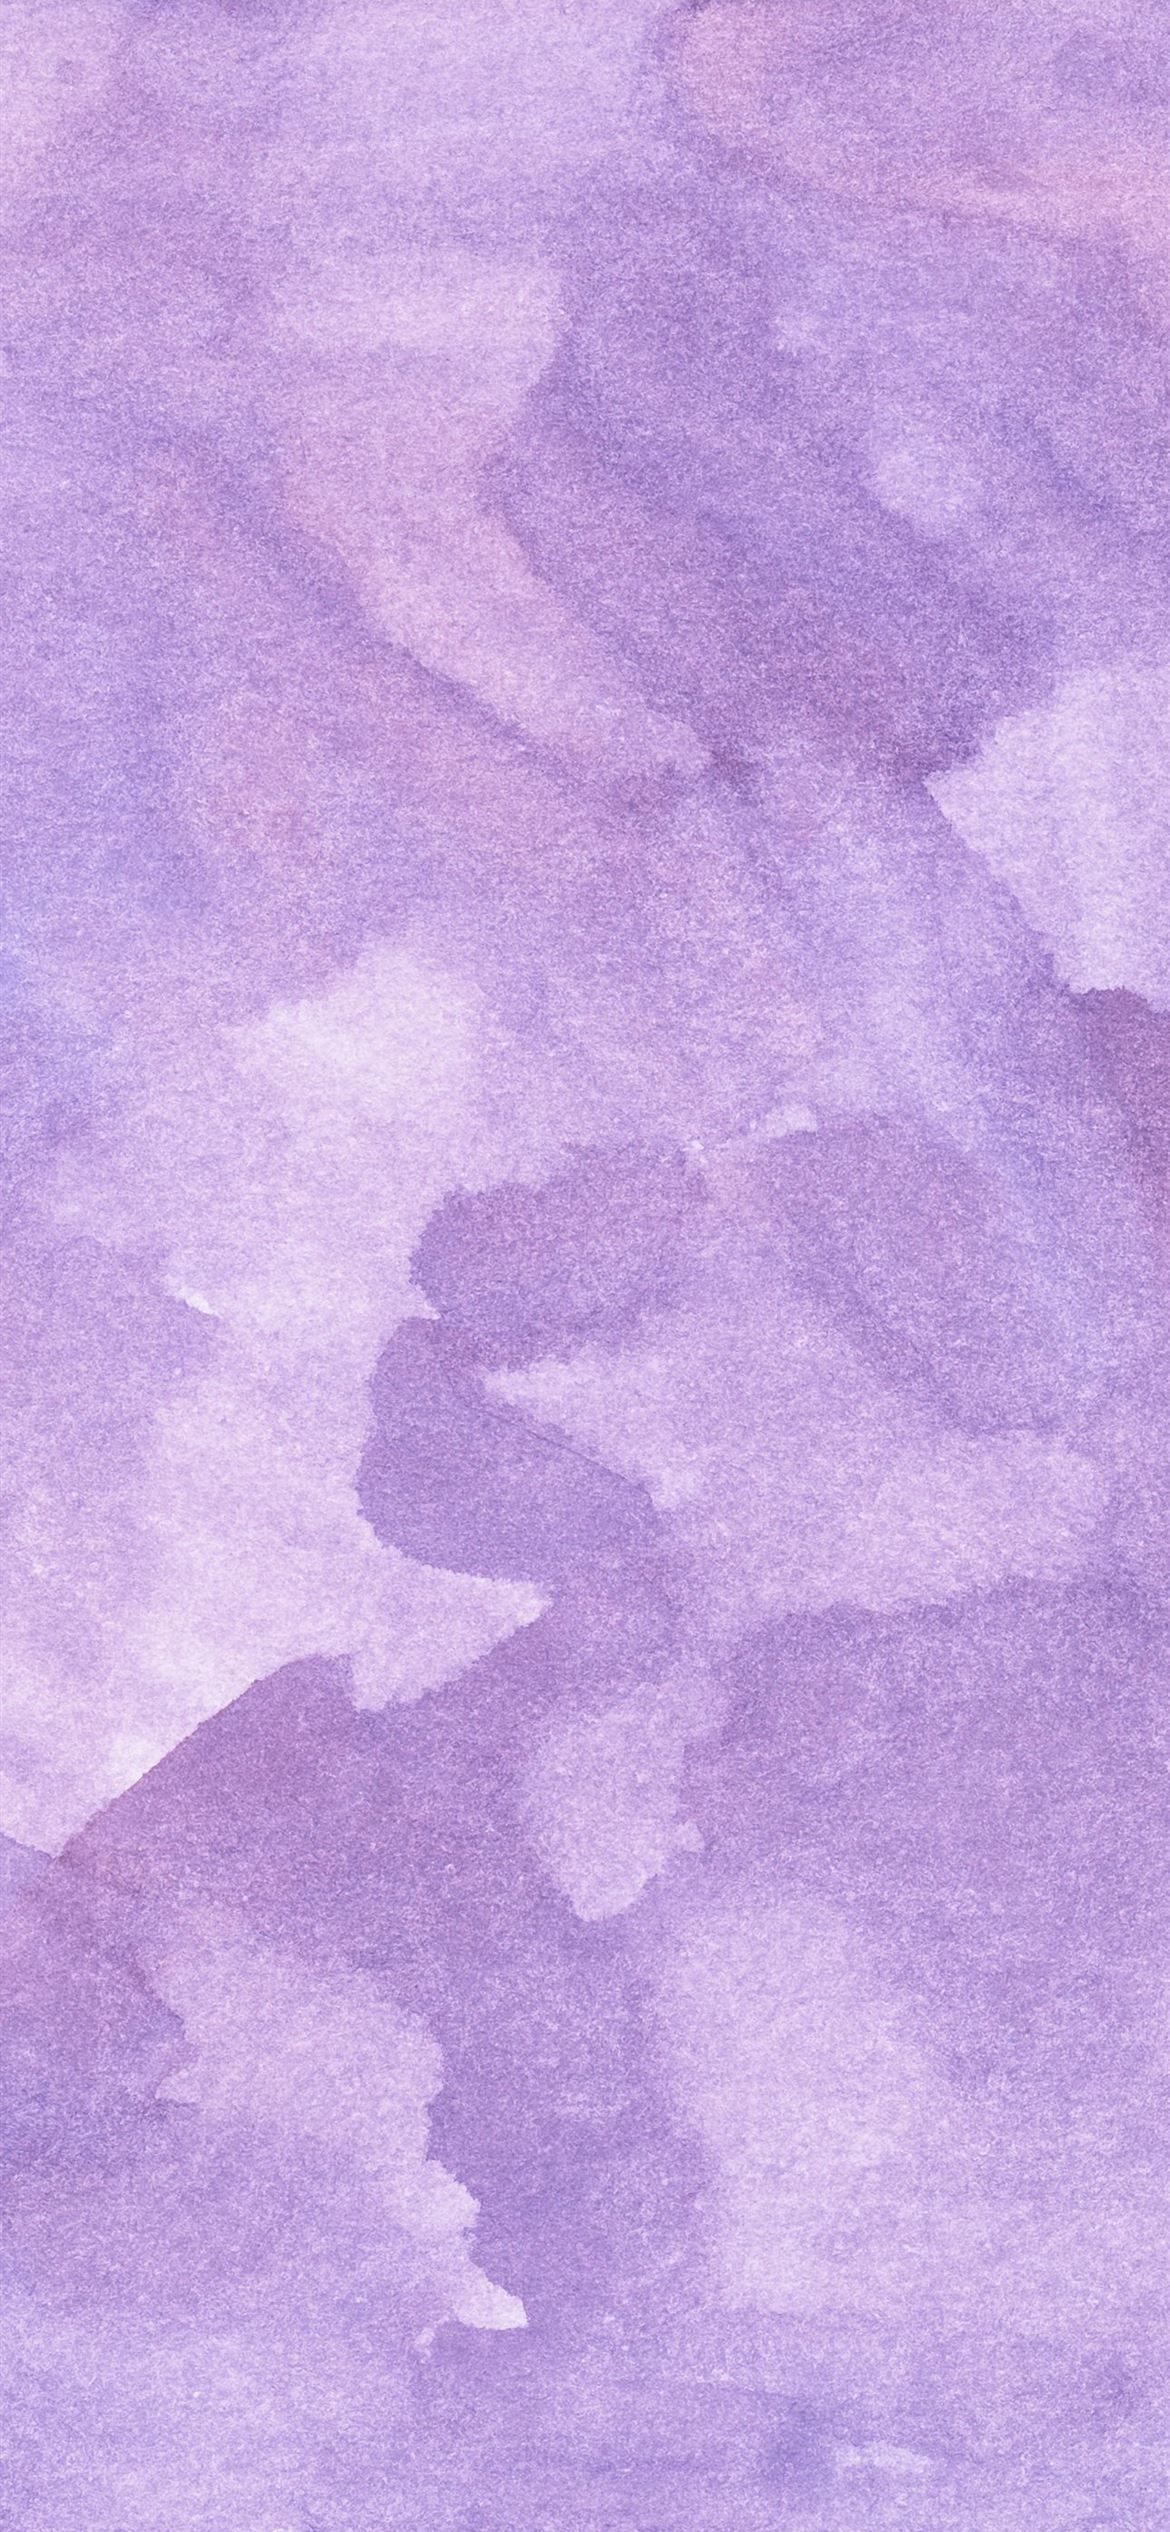 a watercolor painting of a purple background iPhone Wallpaper Free Download